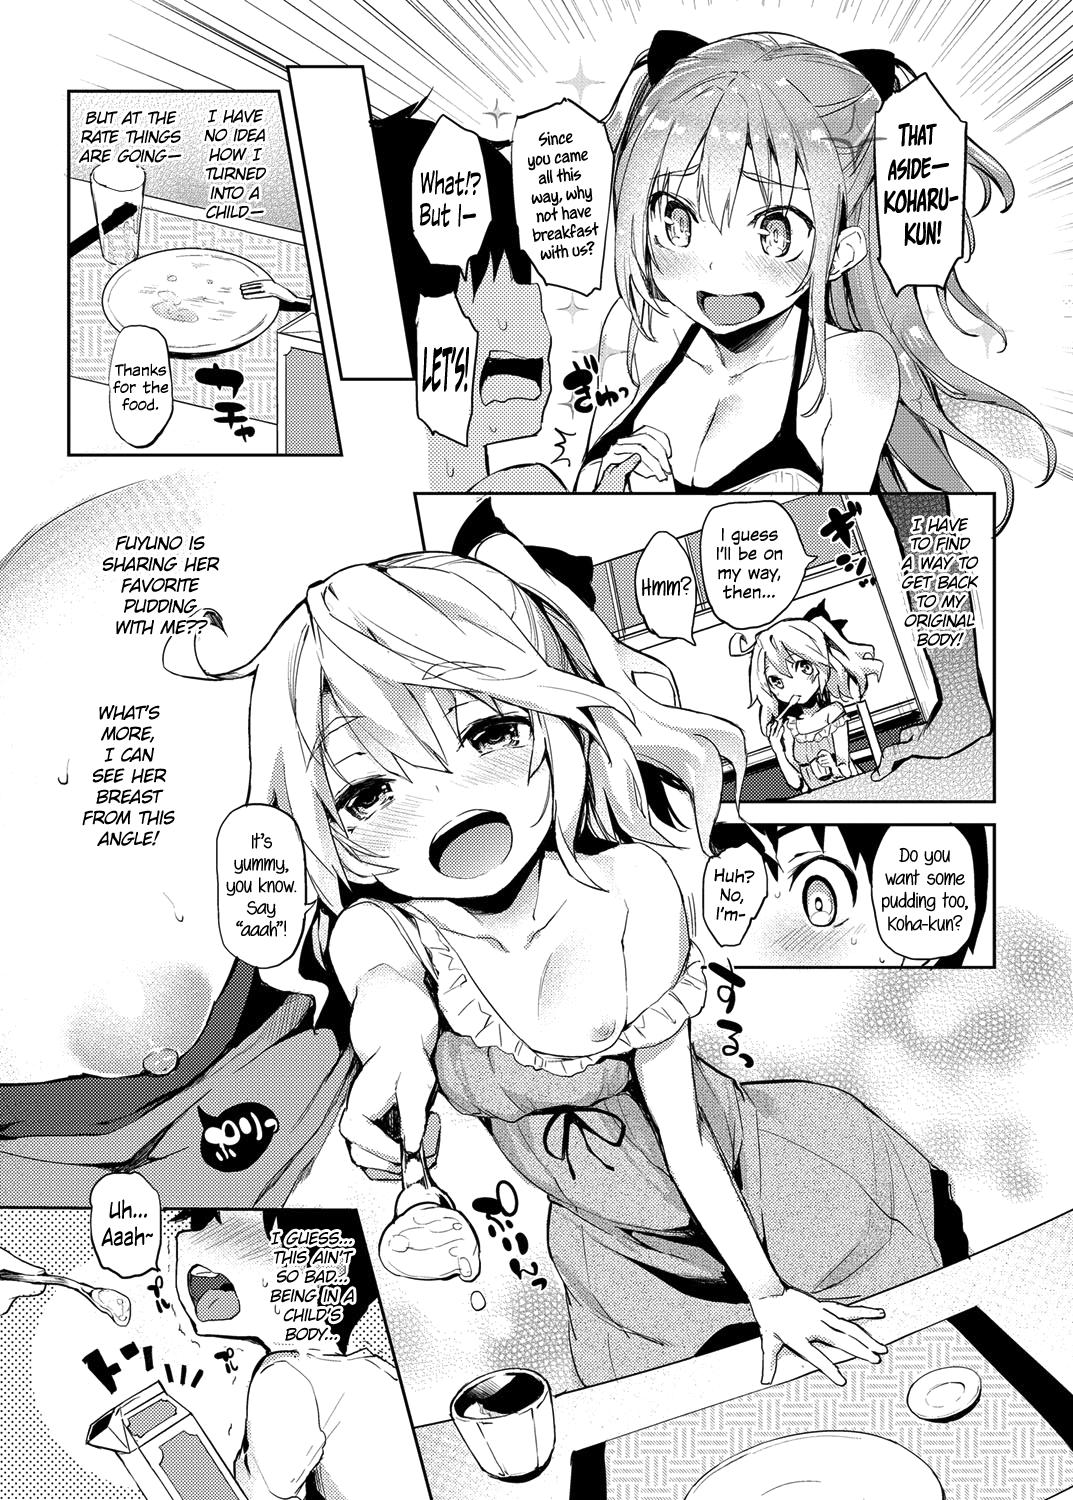 Vibrator Ane Taiken Shuukan | The Older Sister Experience for a Week Shemale Porn - Page 7